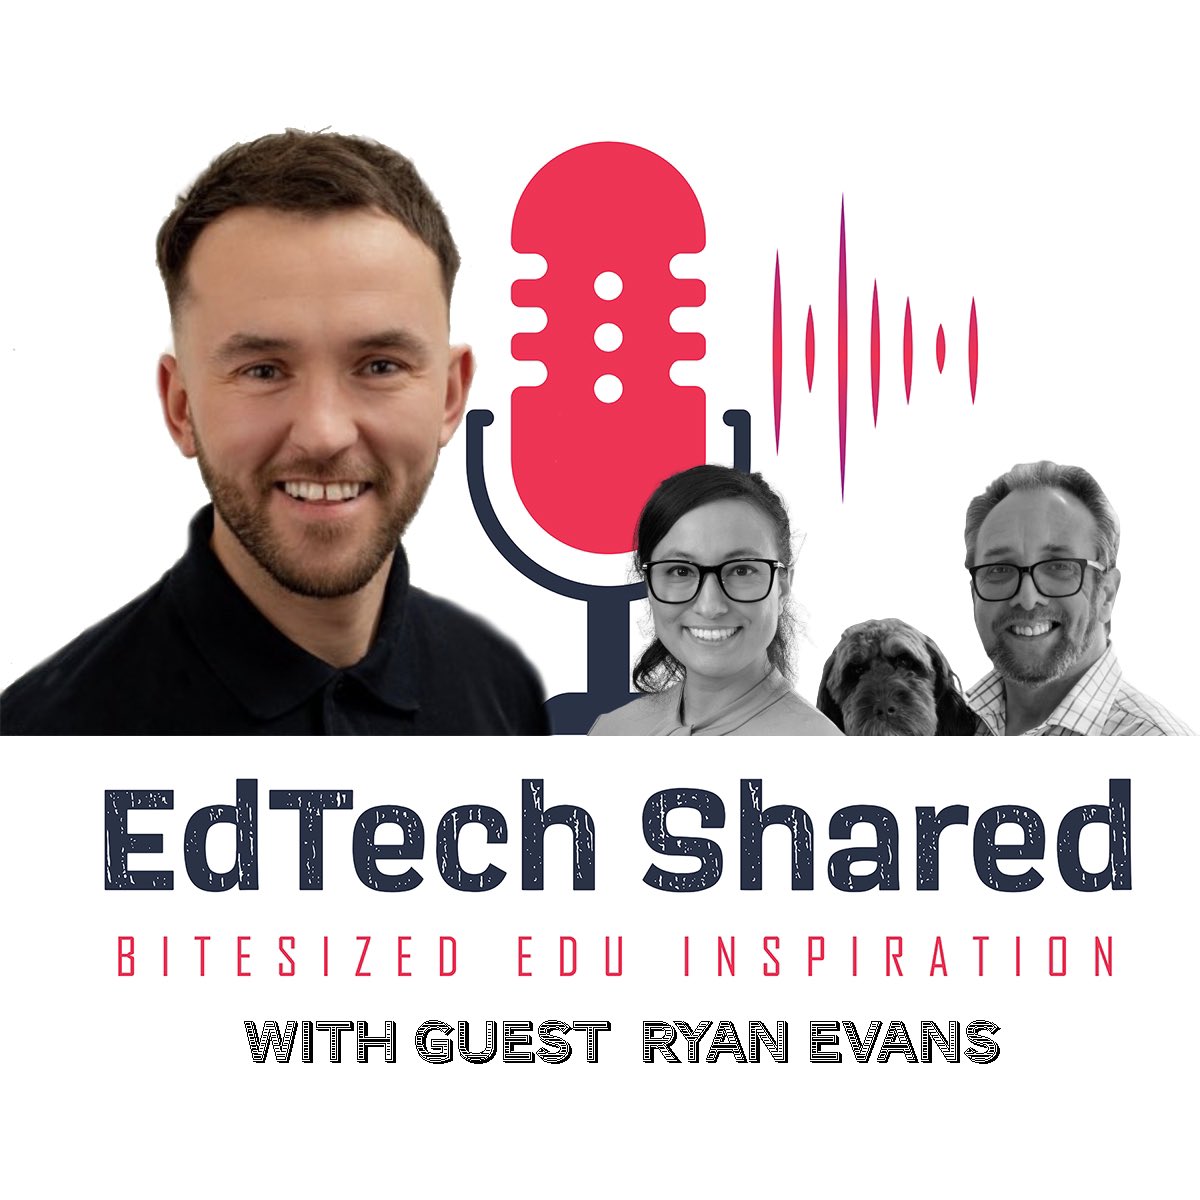 Great new episode with @Rufio99 talking about his journey and developing a free teacher platform to support inclusive education @IncludEduOnline 

podbean.com/ei/pb-57h7u-12…